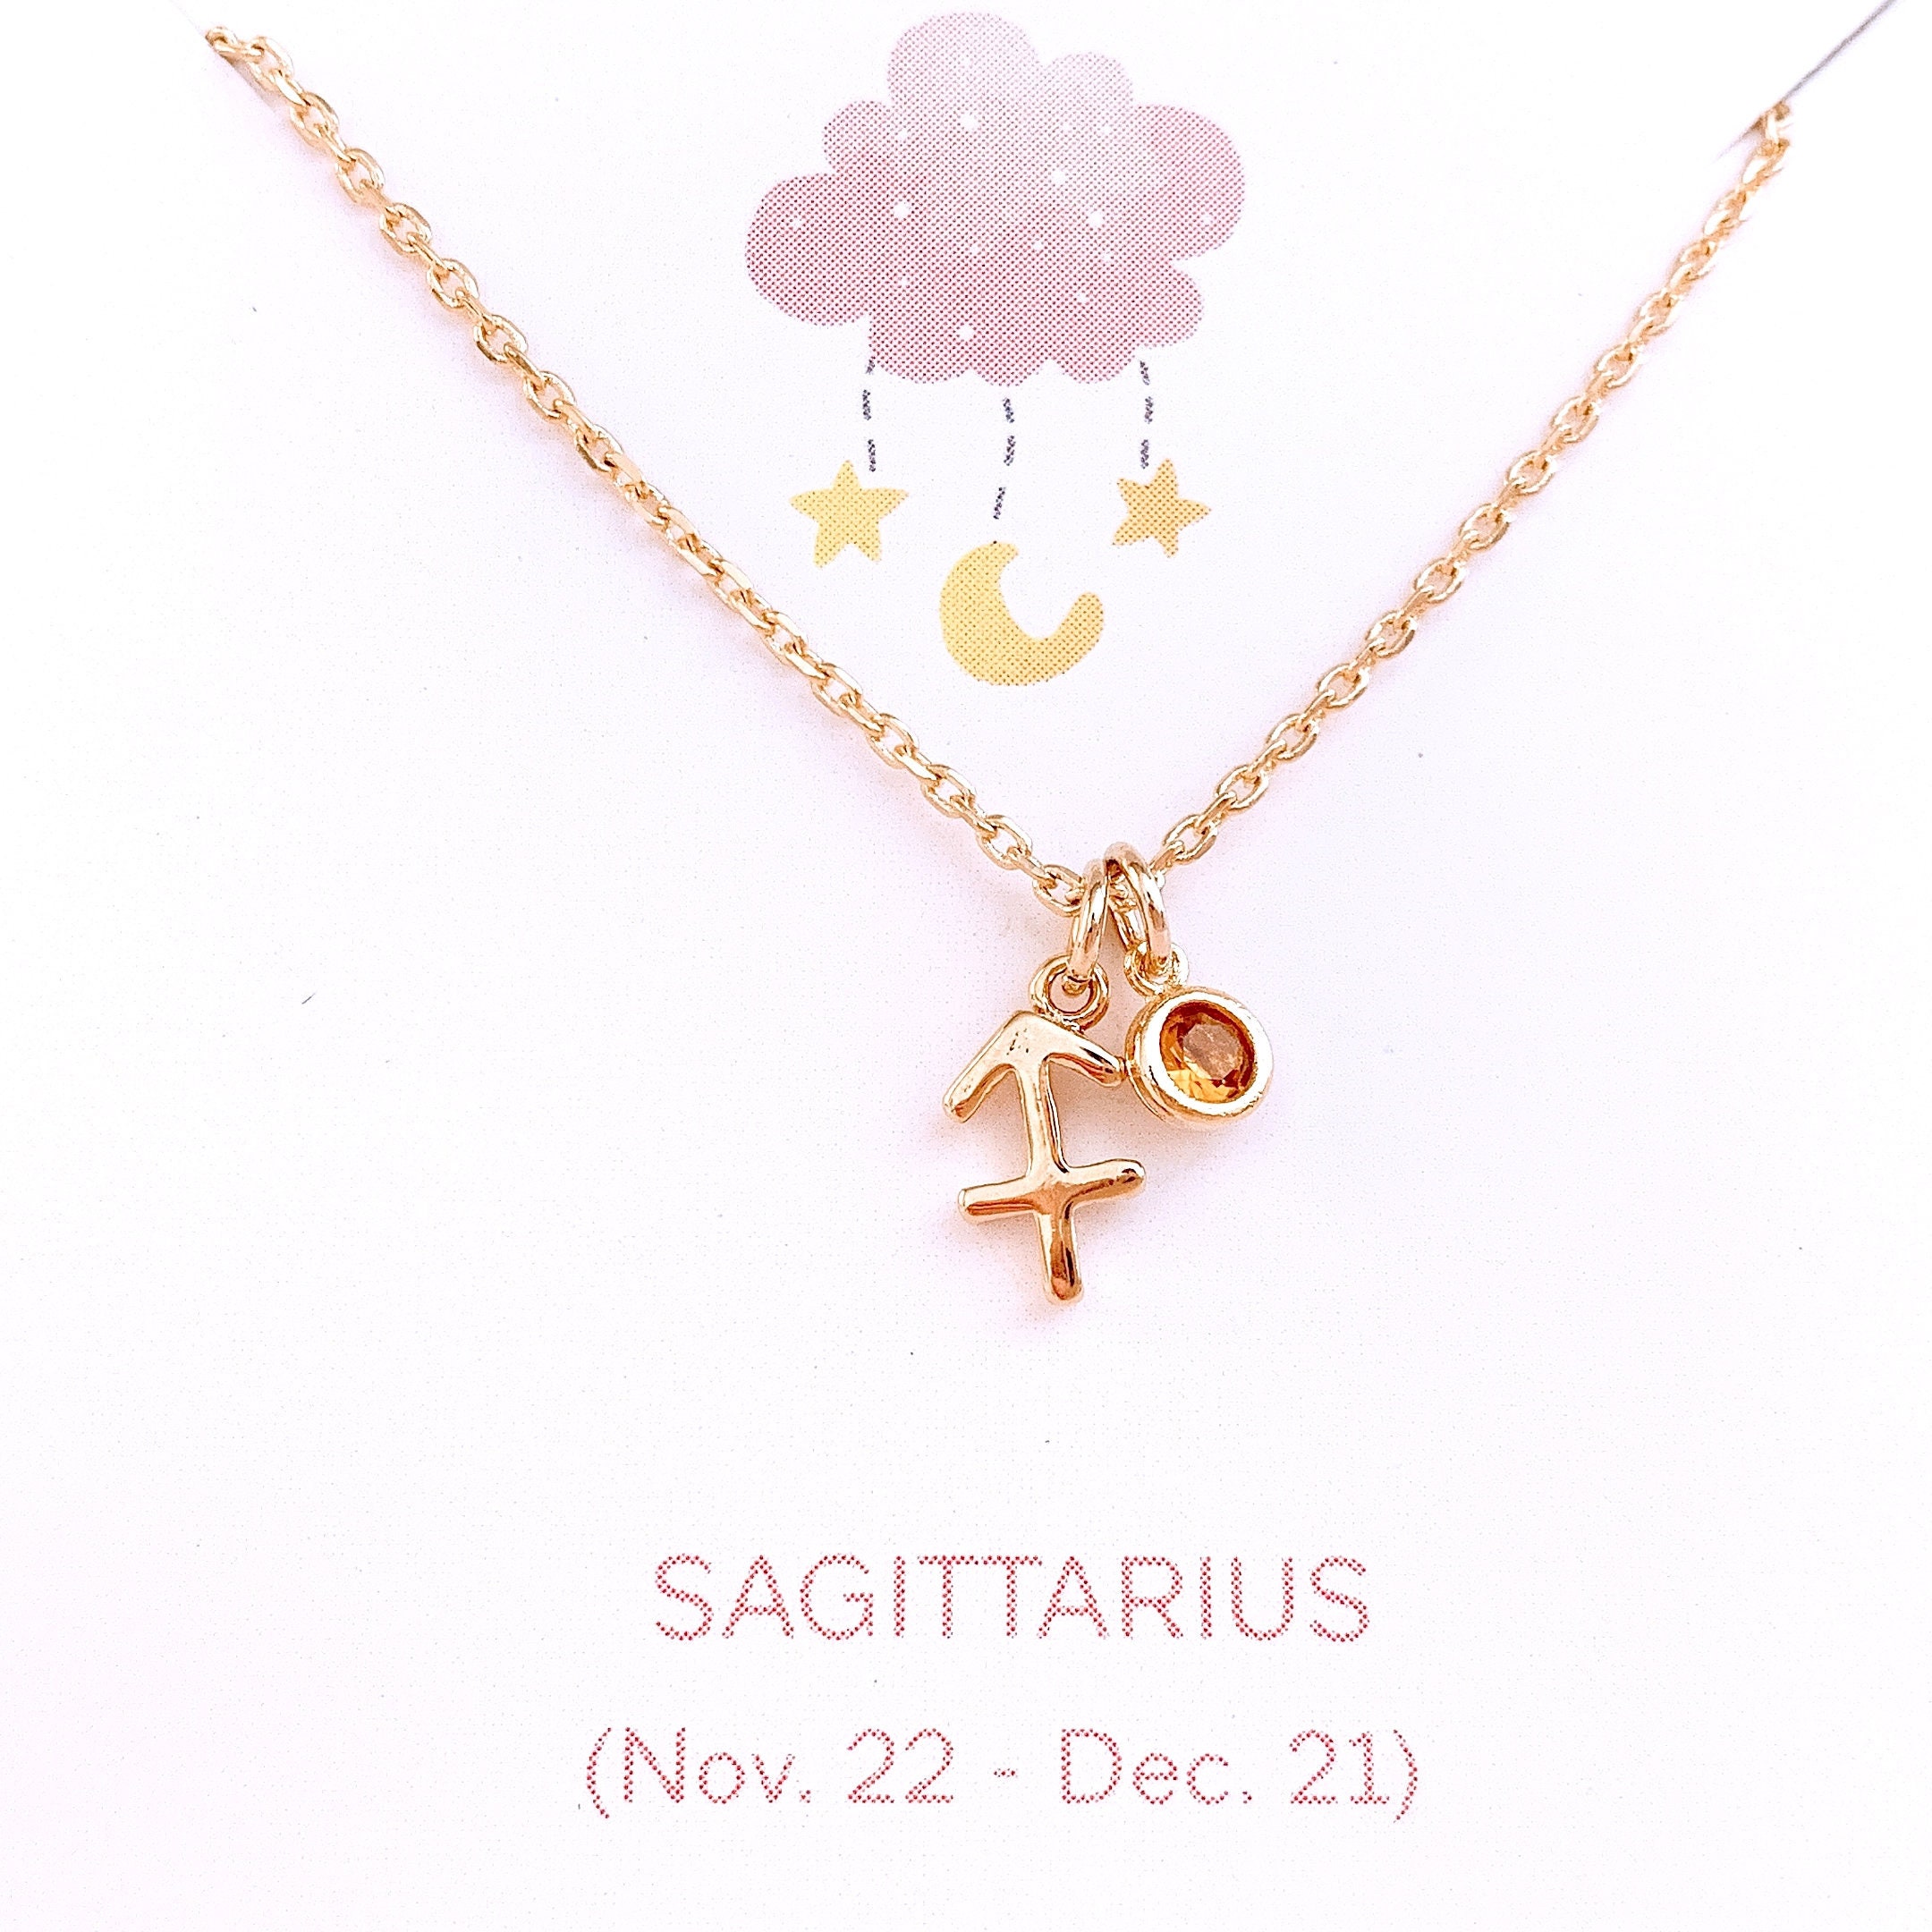 Sagittarius Necklace - Birthstone Necklace- Astrology Sign- Gold Star Zodiac Jewelry- Vintage Constellations Birthday Gifts